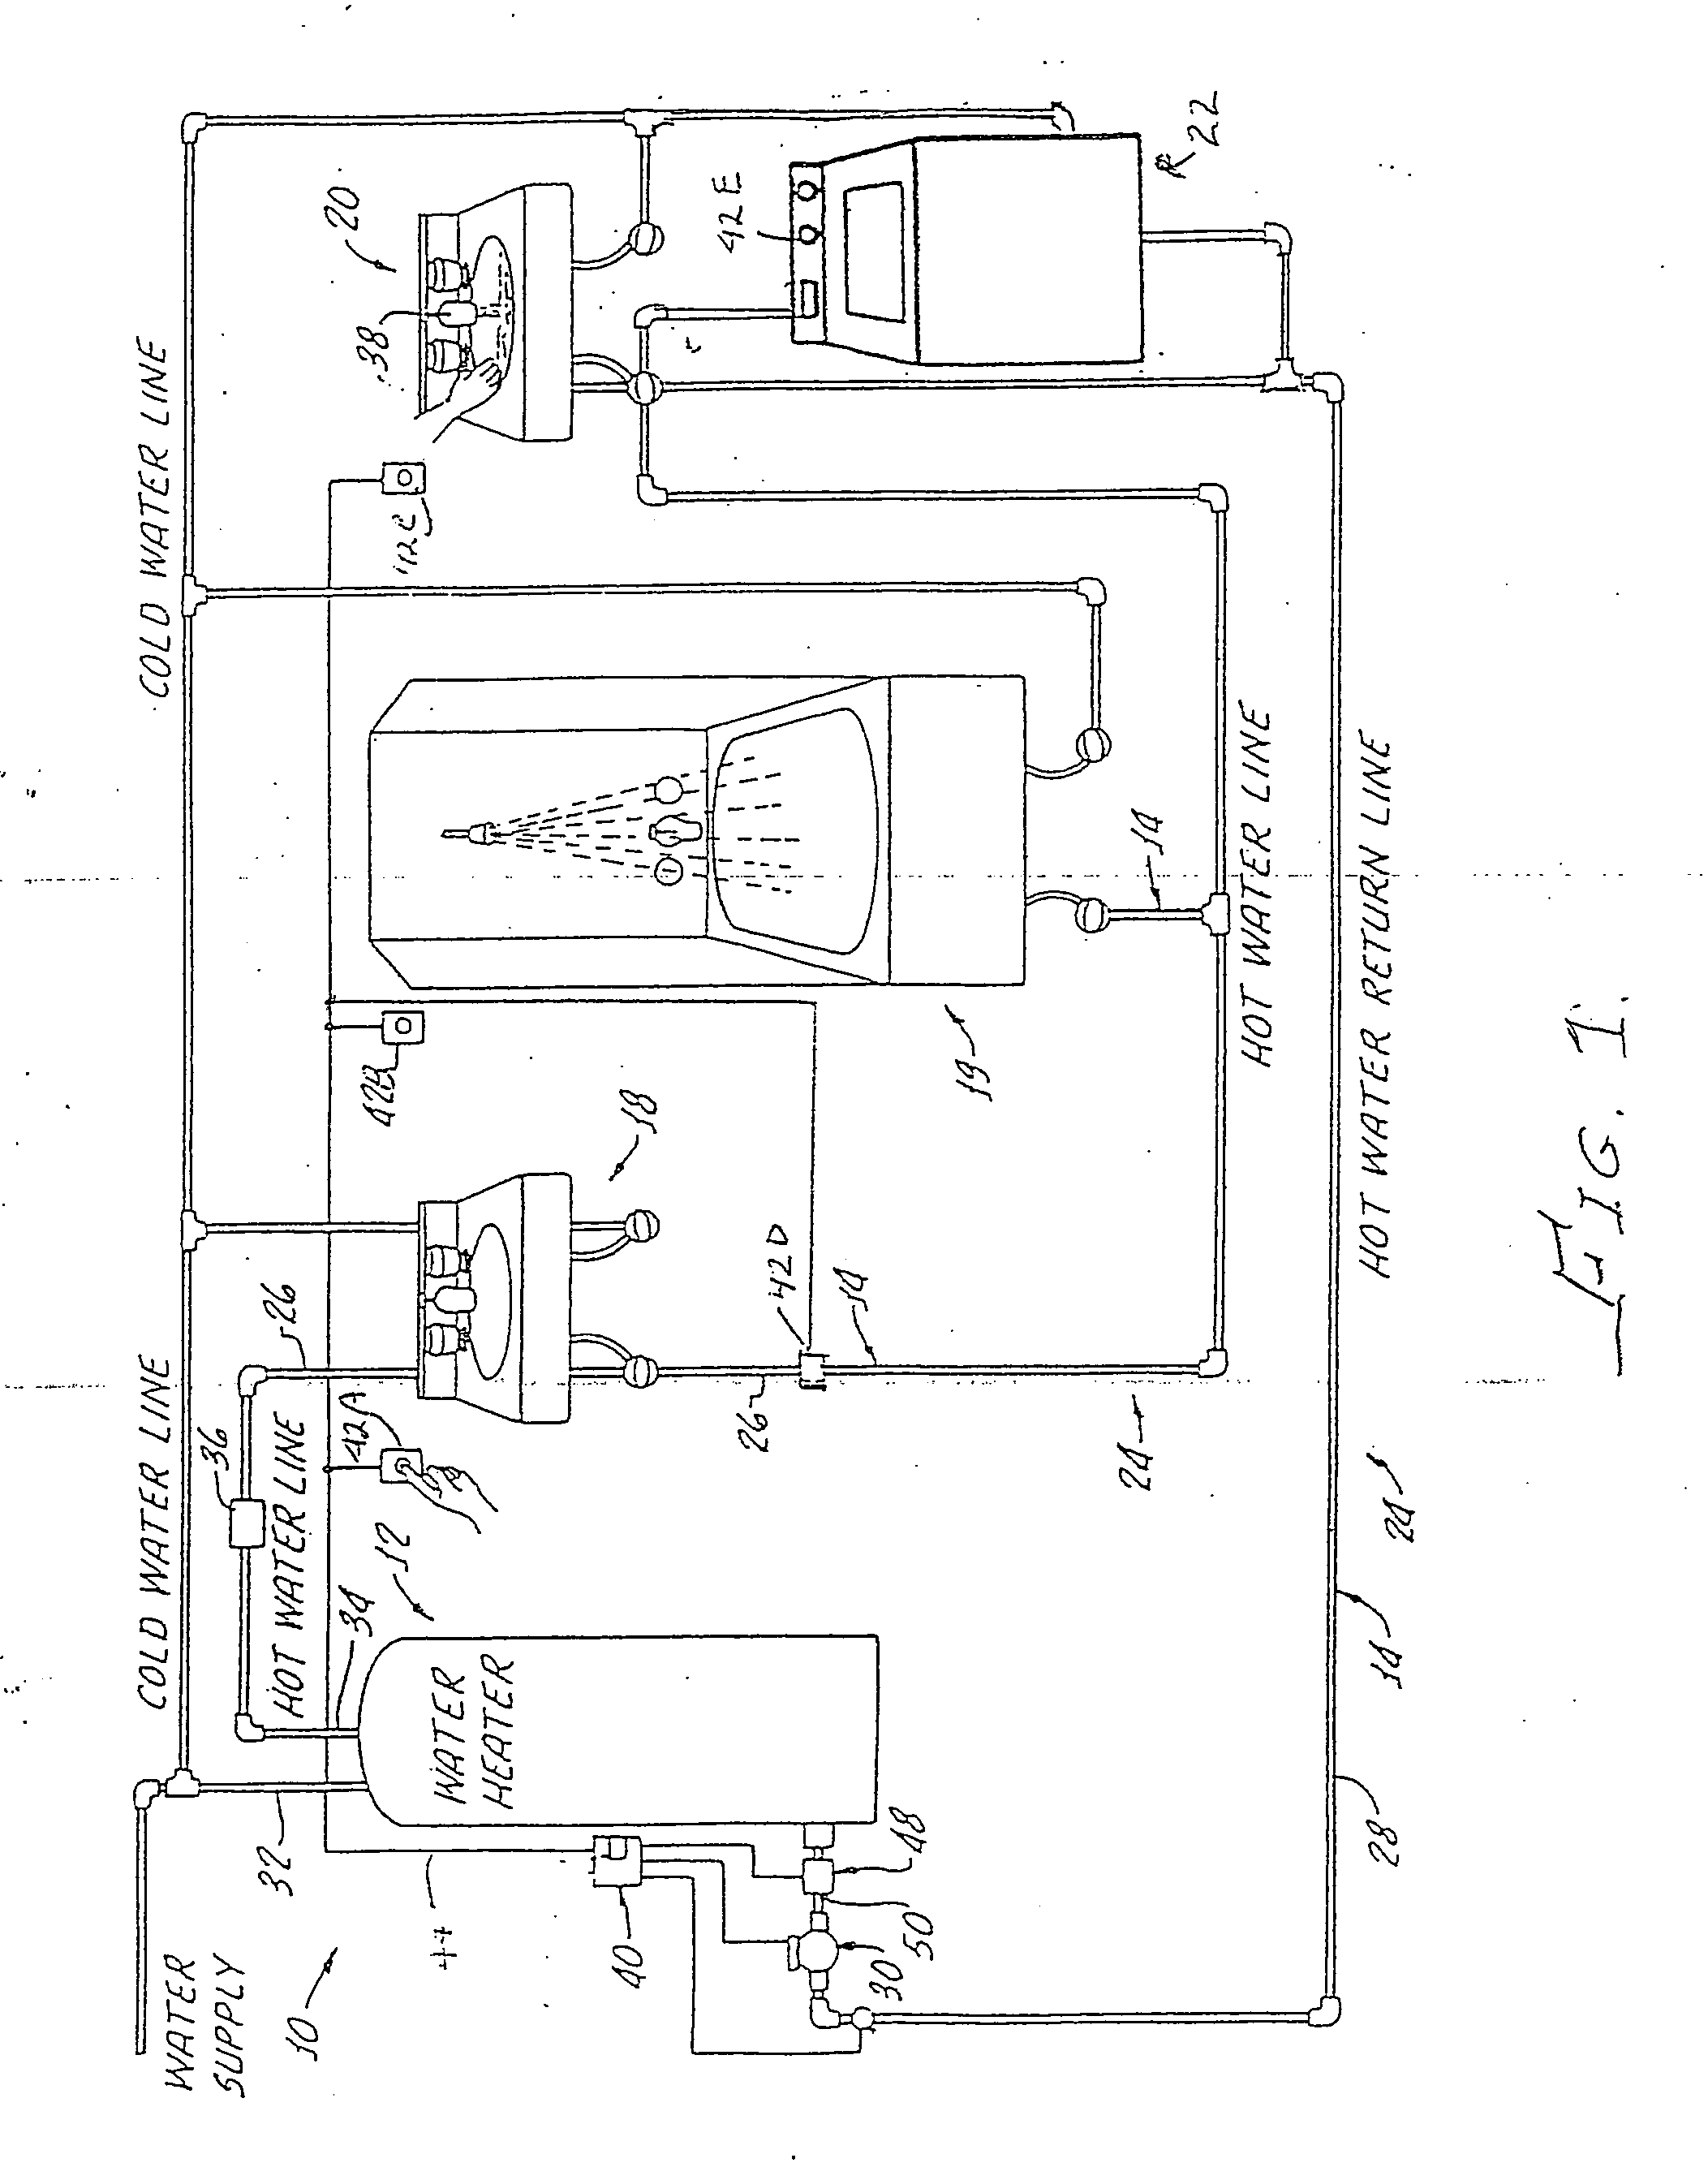 Method for operating a multi family/commercial plumbing system